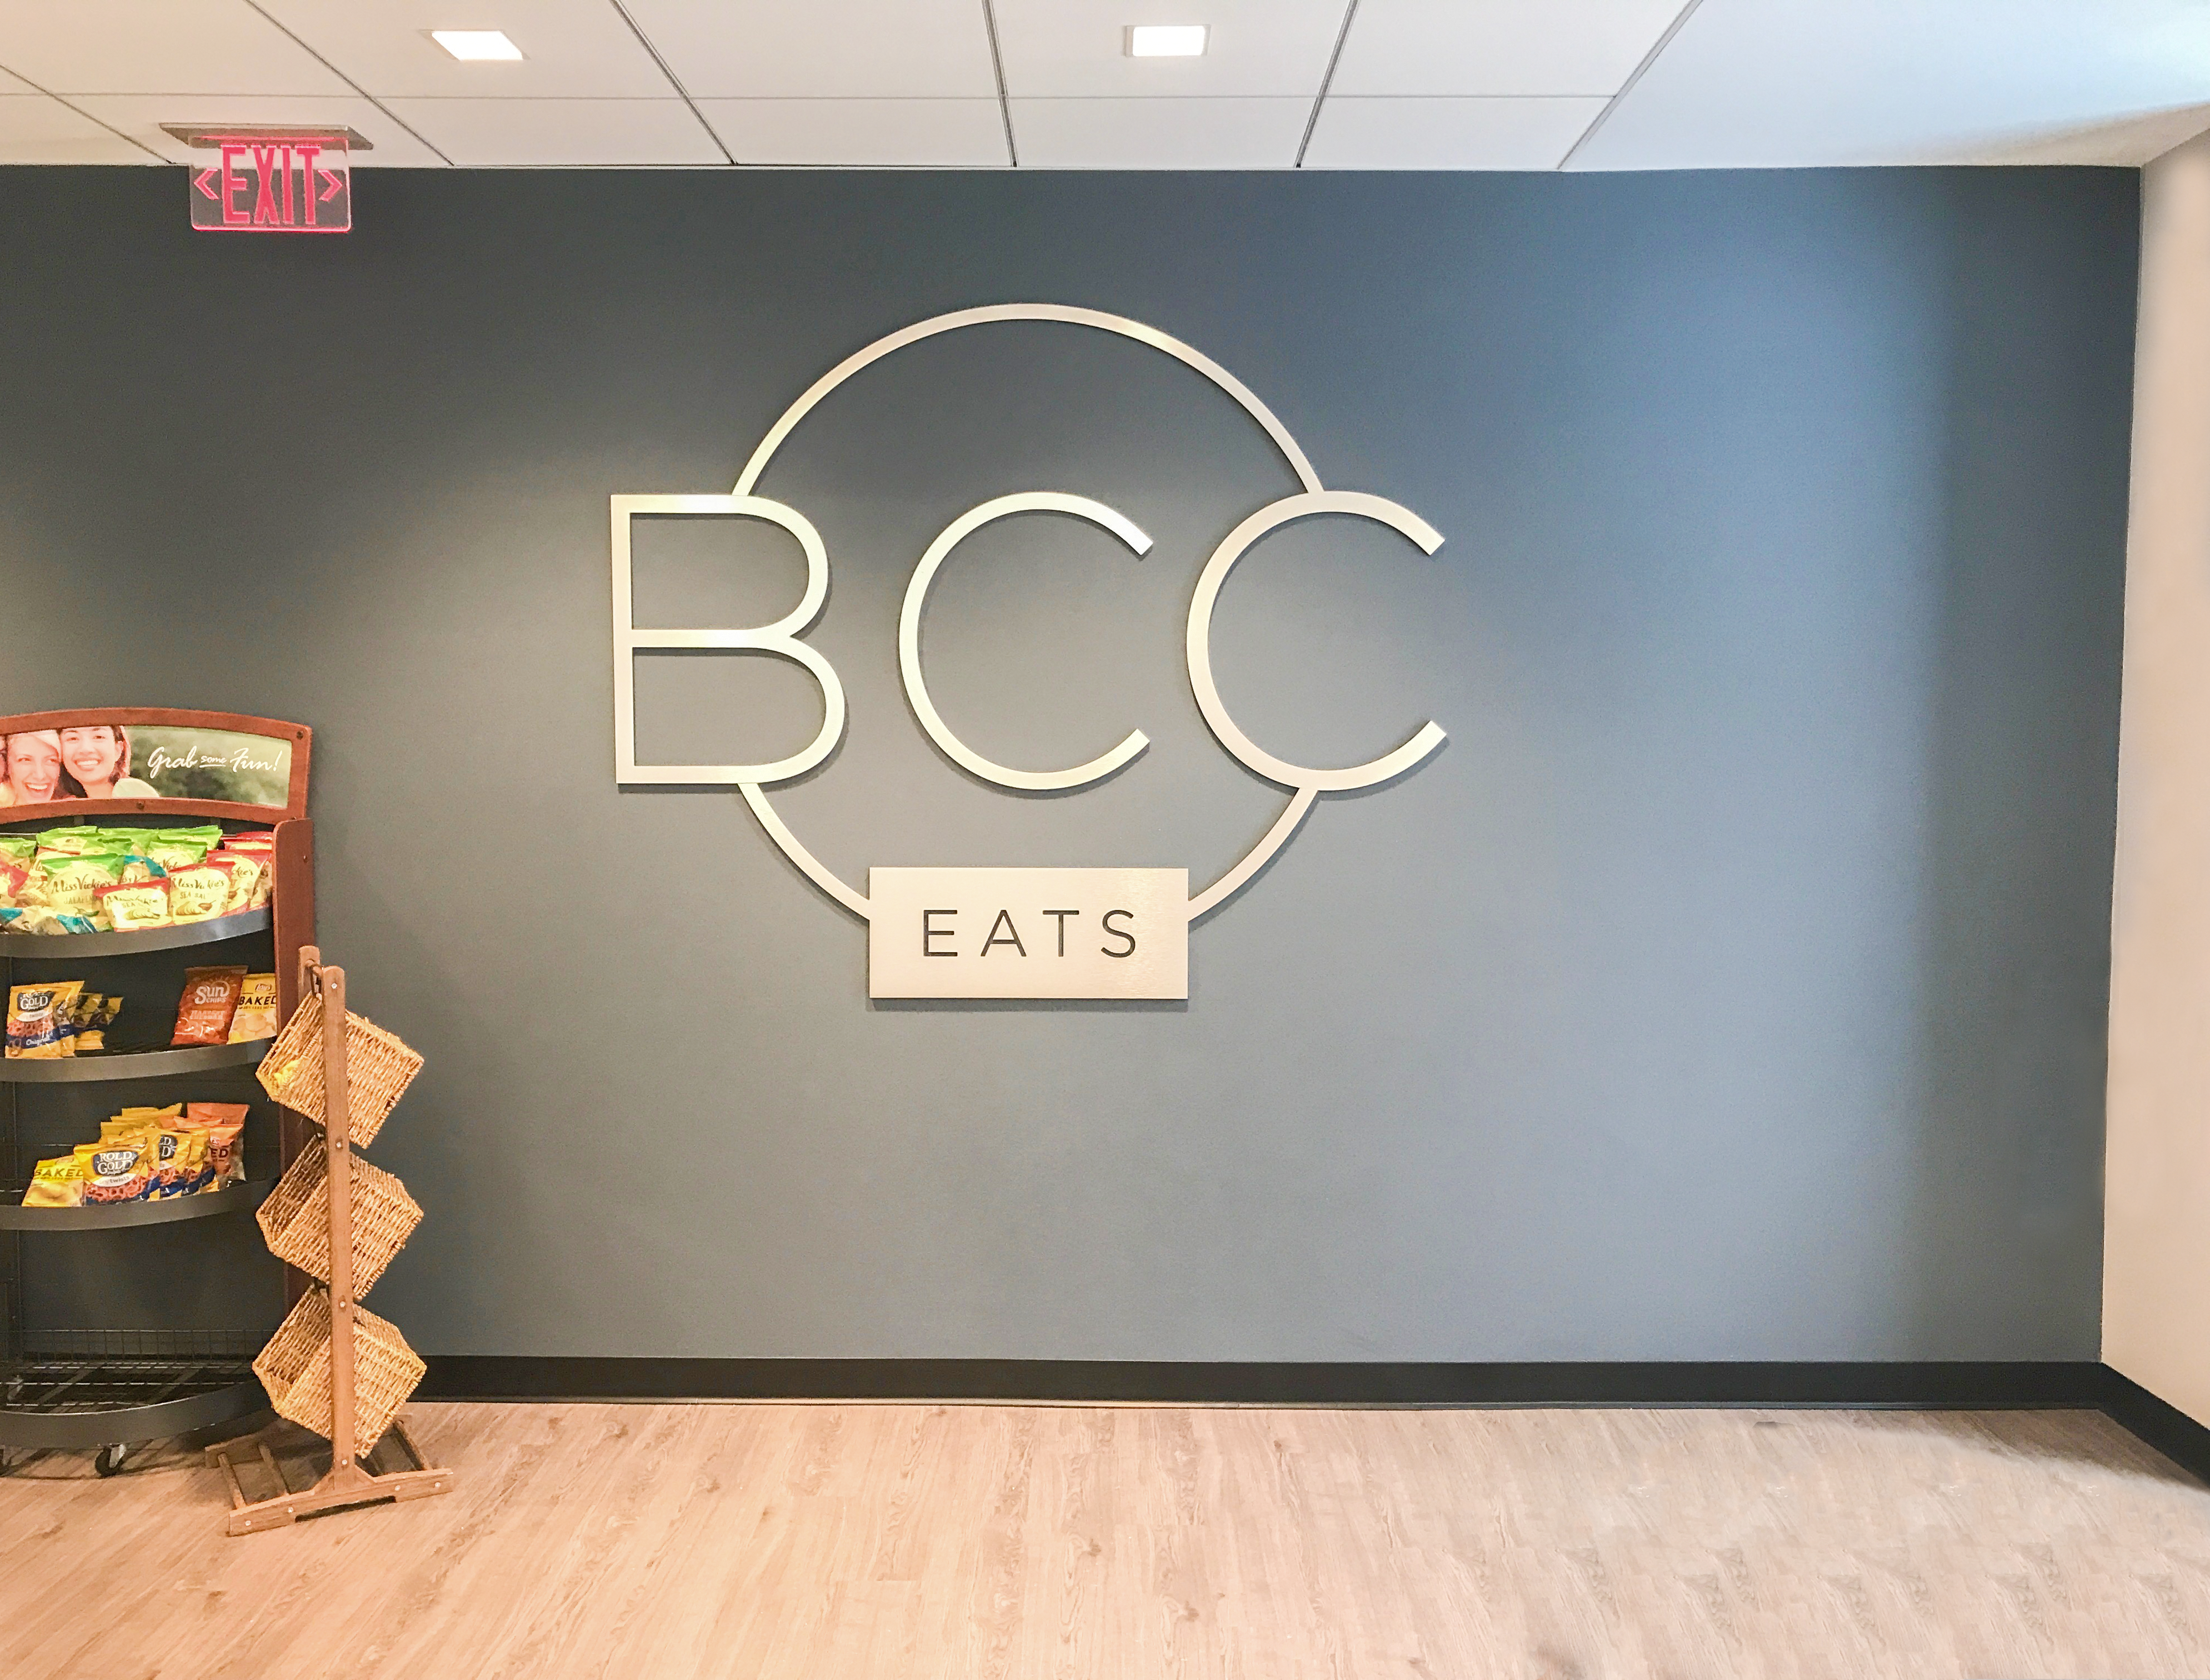 BCC Eats wall sign for restauraunt